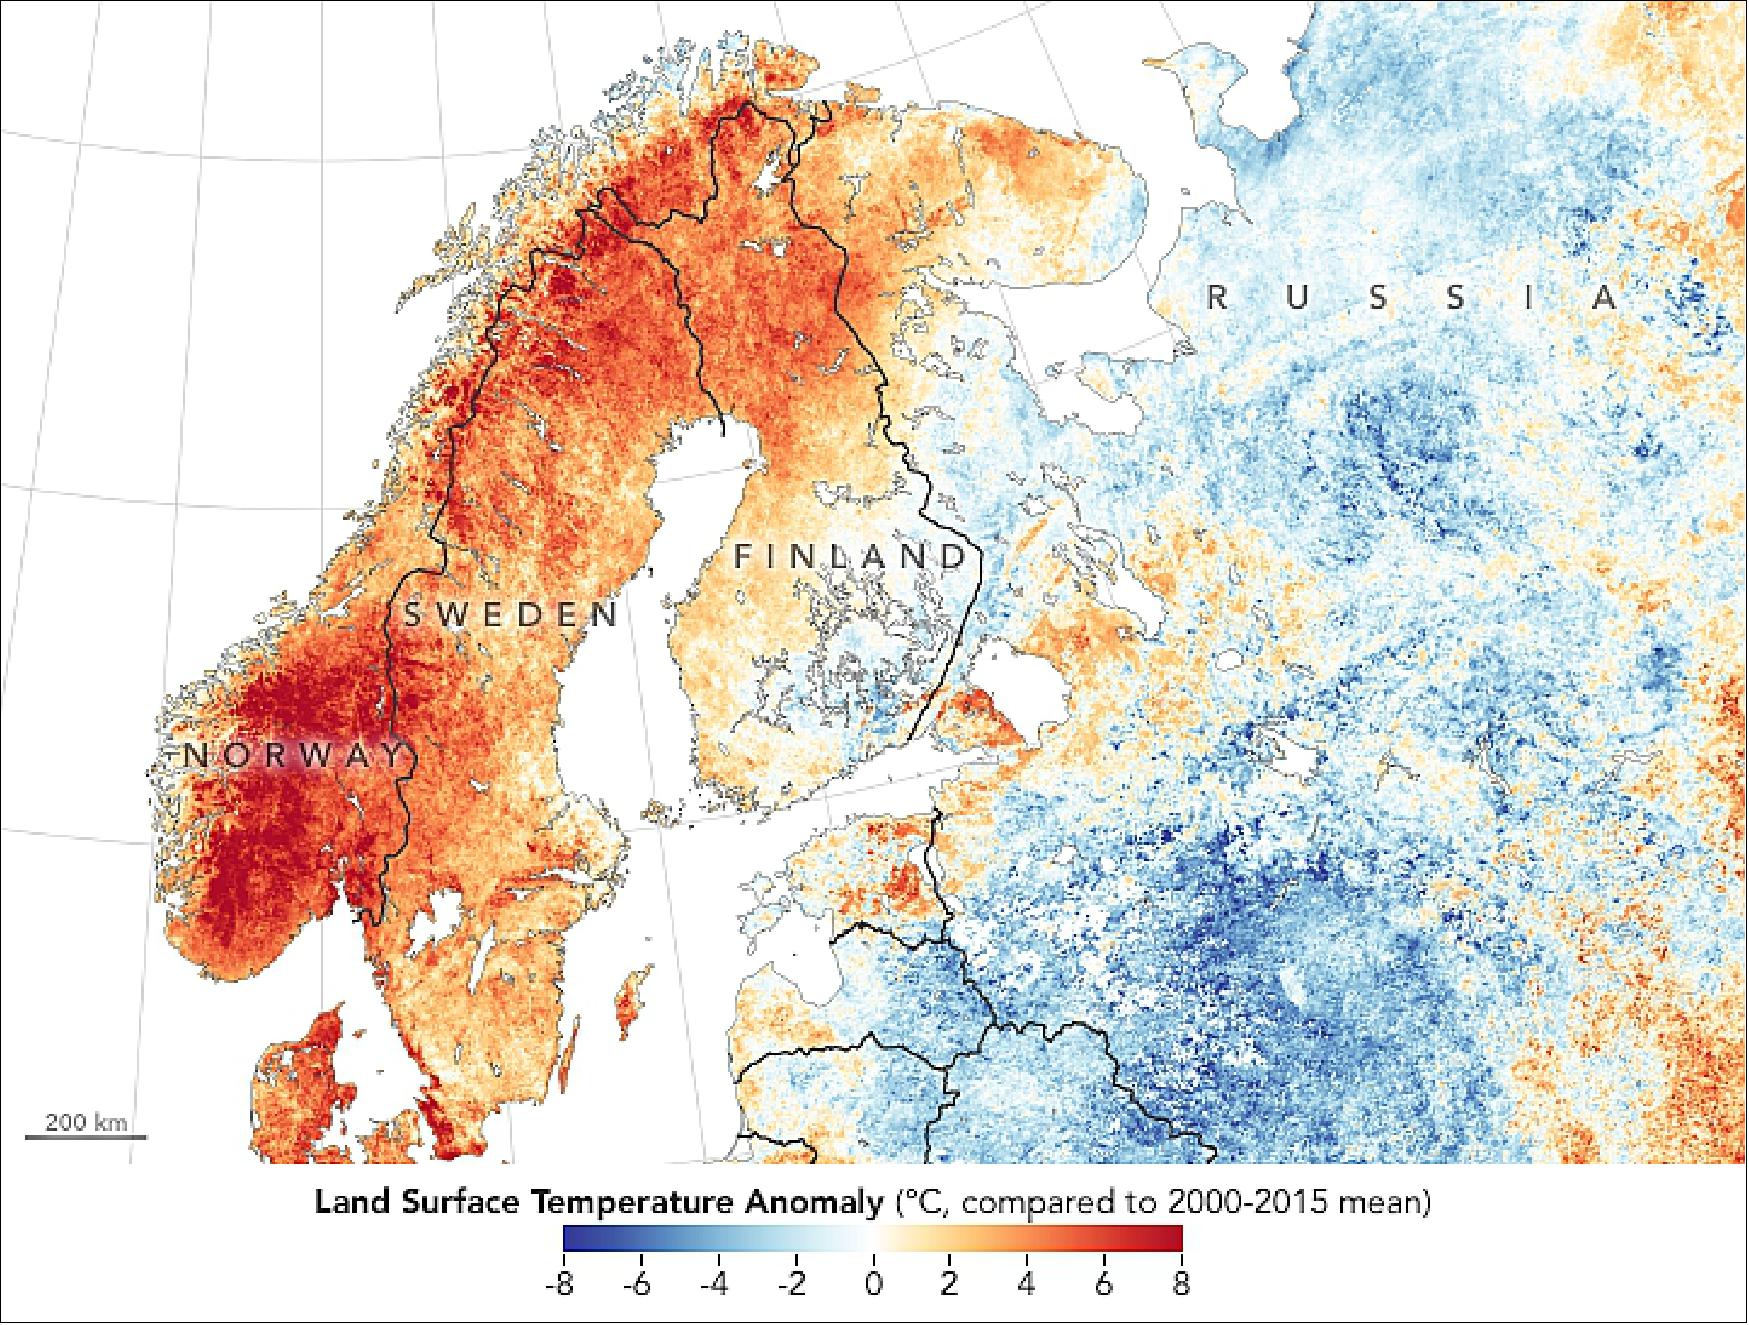 Figure 20: This temperature anomaly map is based on data from MODIS on NASA’s Terra satellite. It shows land surface temperatures from July 1-15, 2018, compared to the 2000–2015 average for the same two-week period. Red colors depict areas that were hotter than average; blues were colder than average. White pixels were normal, and gray pixels did not have enough data, most likely due to excessive cloud cover. Note that it depicts land surface temperatures, not air temperatures. Land surface temperatures reflect how hot the surface of the Earth would feel to the touch in a particular location. They can sometimes be significantly hotter or cooler than air temperatures (image credit: NASA Earth Observatory image by Lauren Dauphin and Joshua Stevens, using MODIS data from LANCE/EOSDIS Rapid Response and the Level 1 and Atmospheres Active Distribution System (LAADS). Story by Kasha Patel)